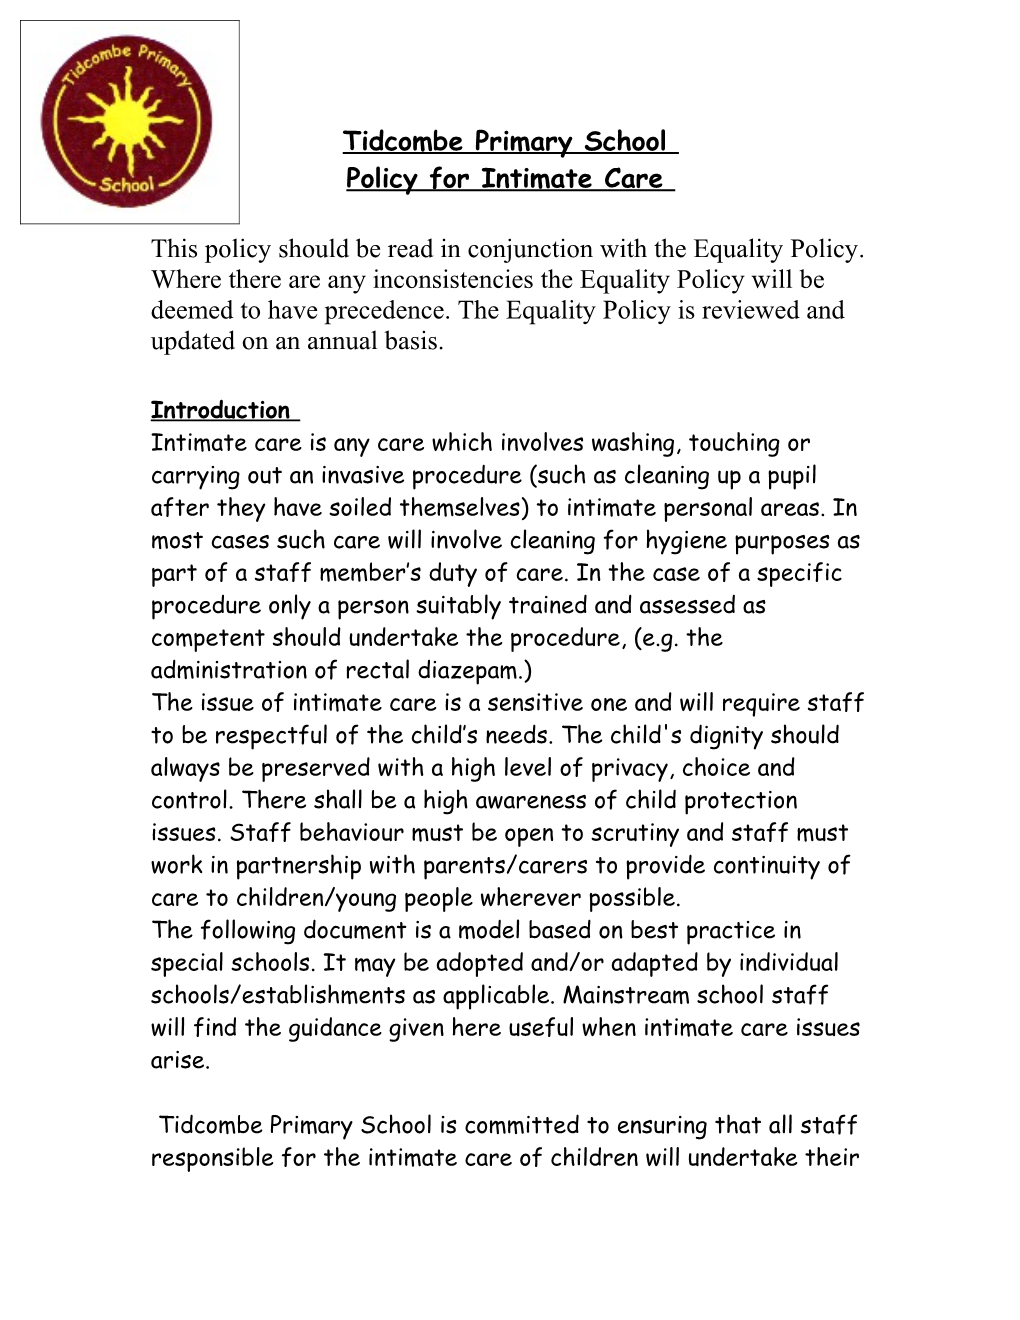 Tidcombe Primary School Policy for Intimate Care